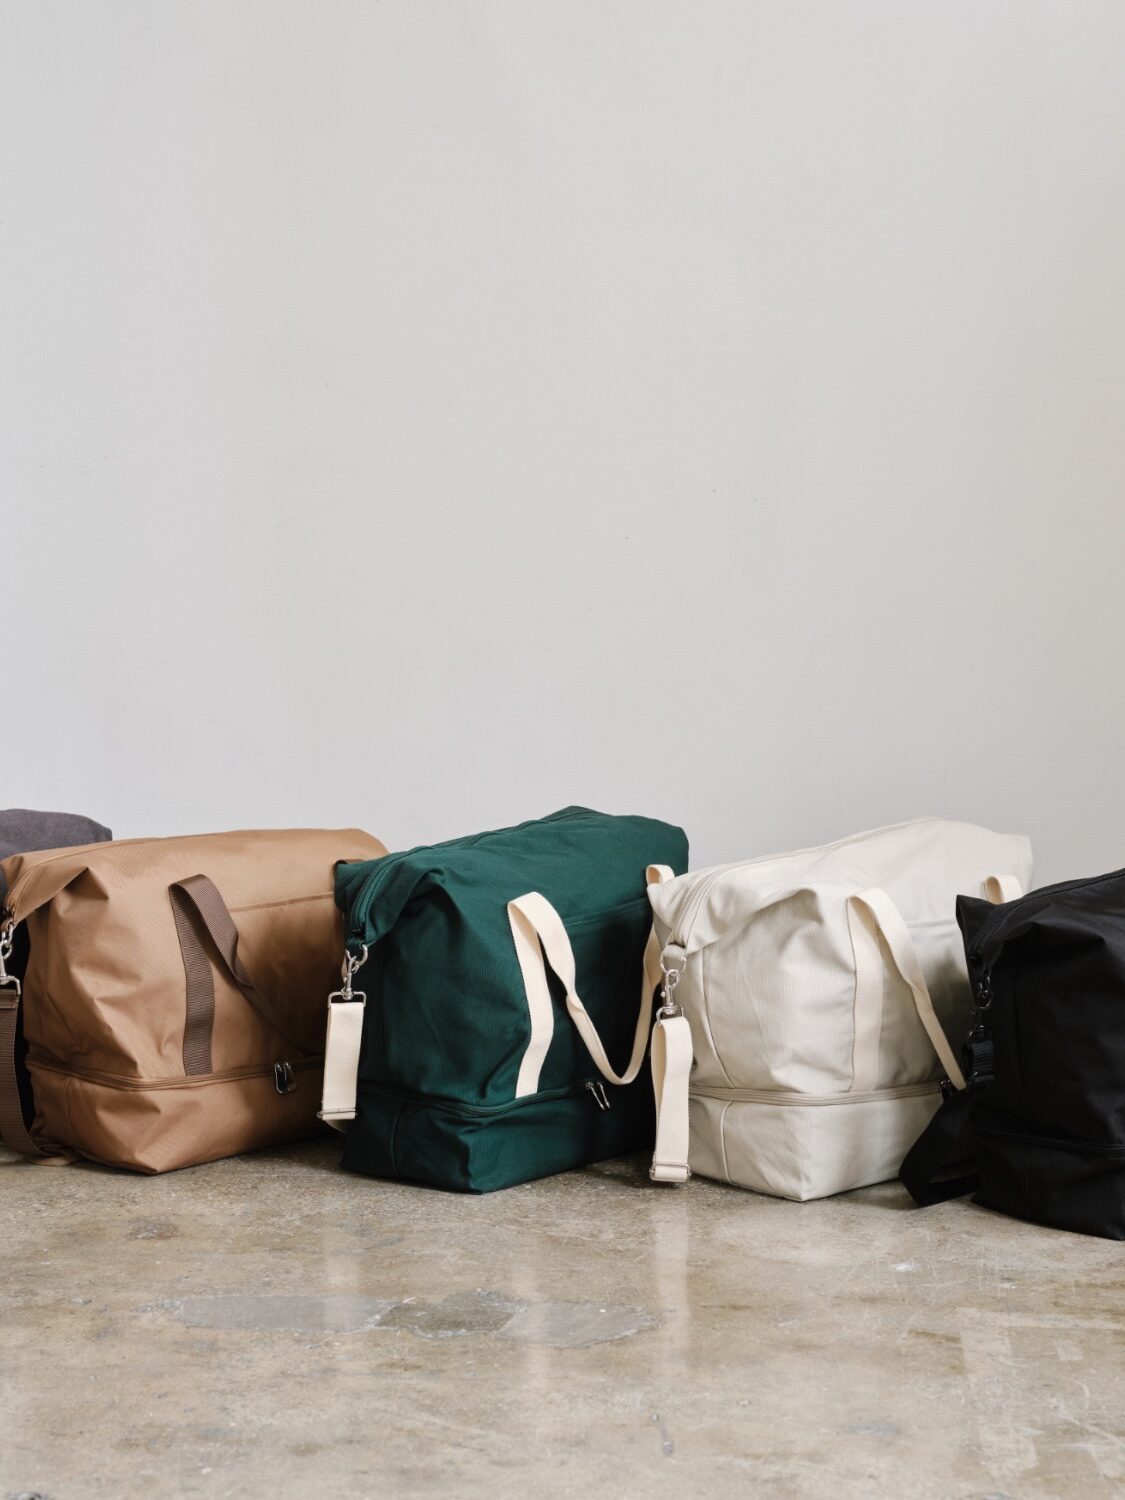 Five duffel bags in various colors (gray, tan, green, white, black) aligned on a concrete floor against a neutral wall.